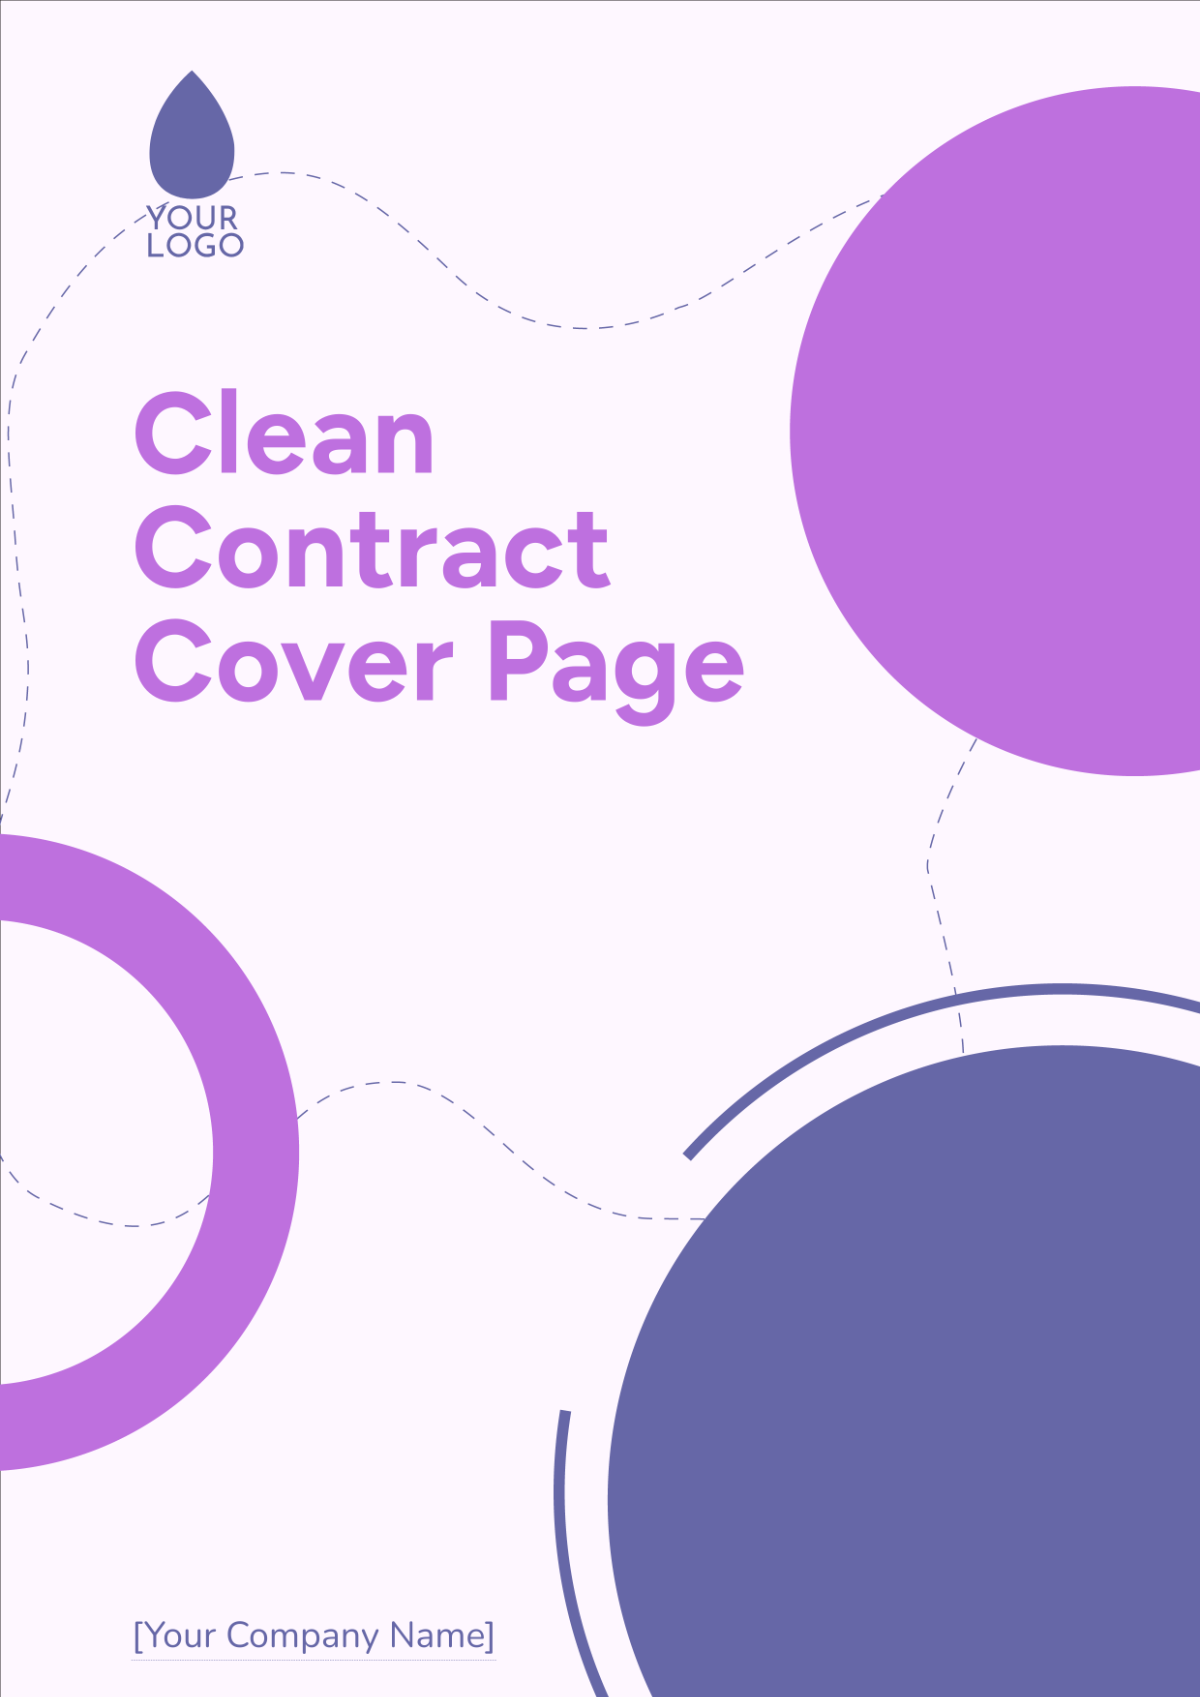 Clean Contract Cover Page Template